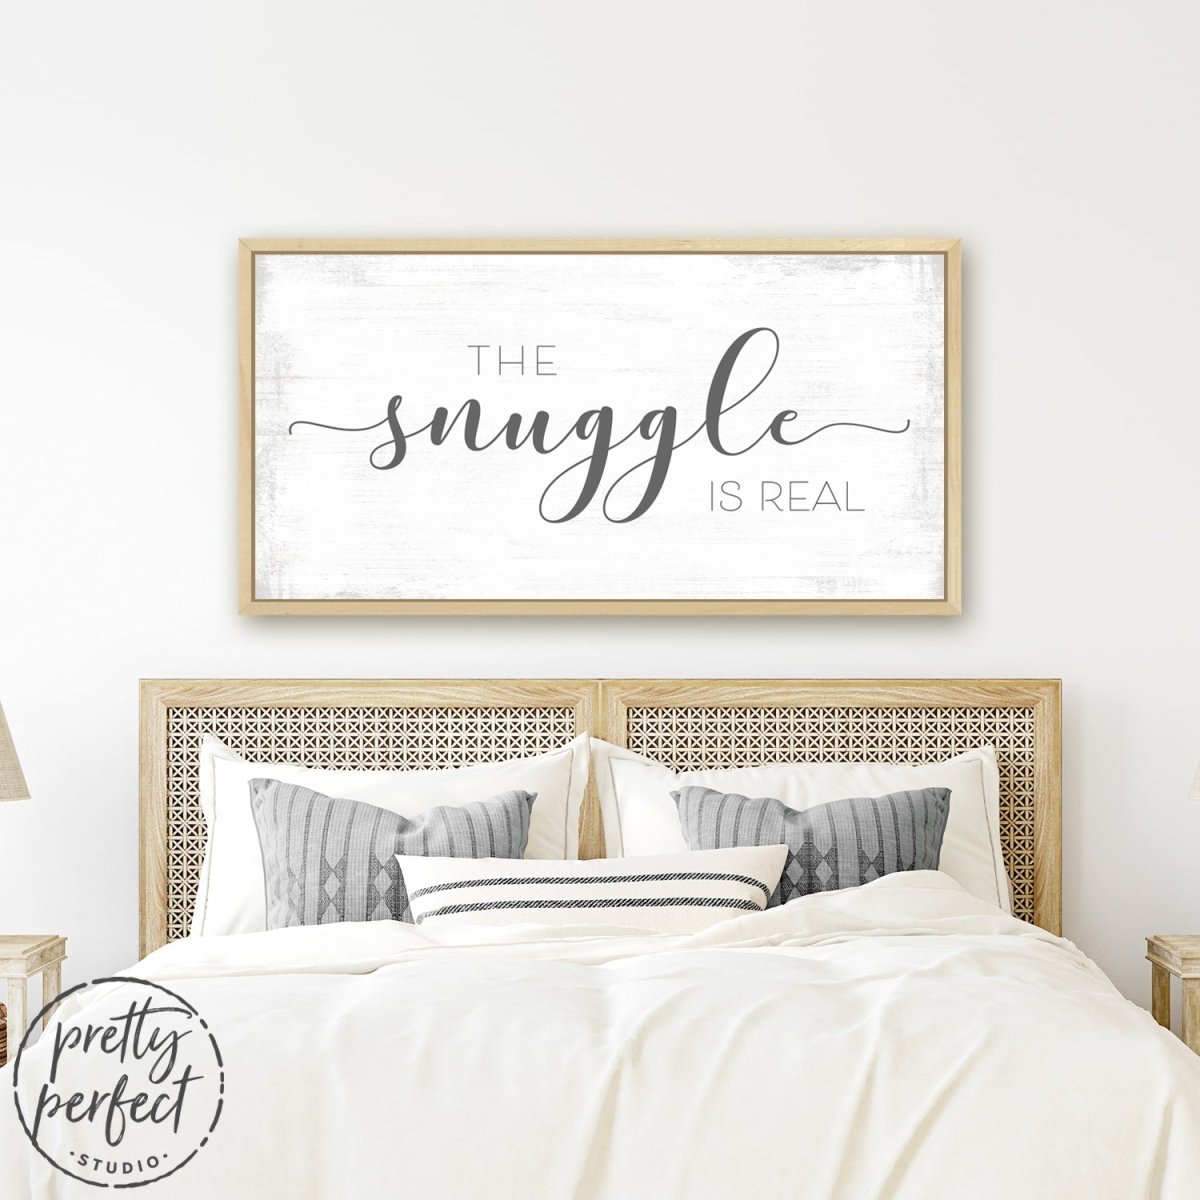 The Snuggle Is Real Sign Over Bed in Couples Bedroom - Pretty Perfect Studio